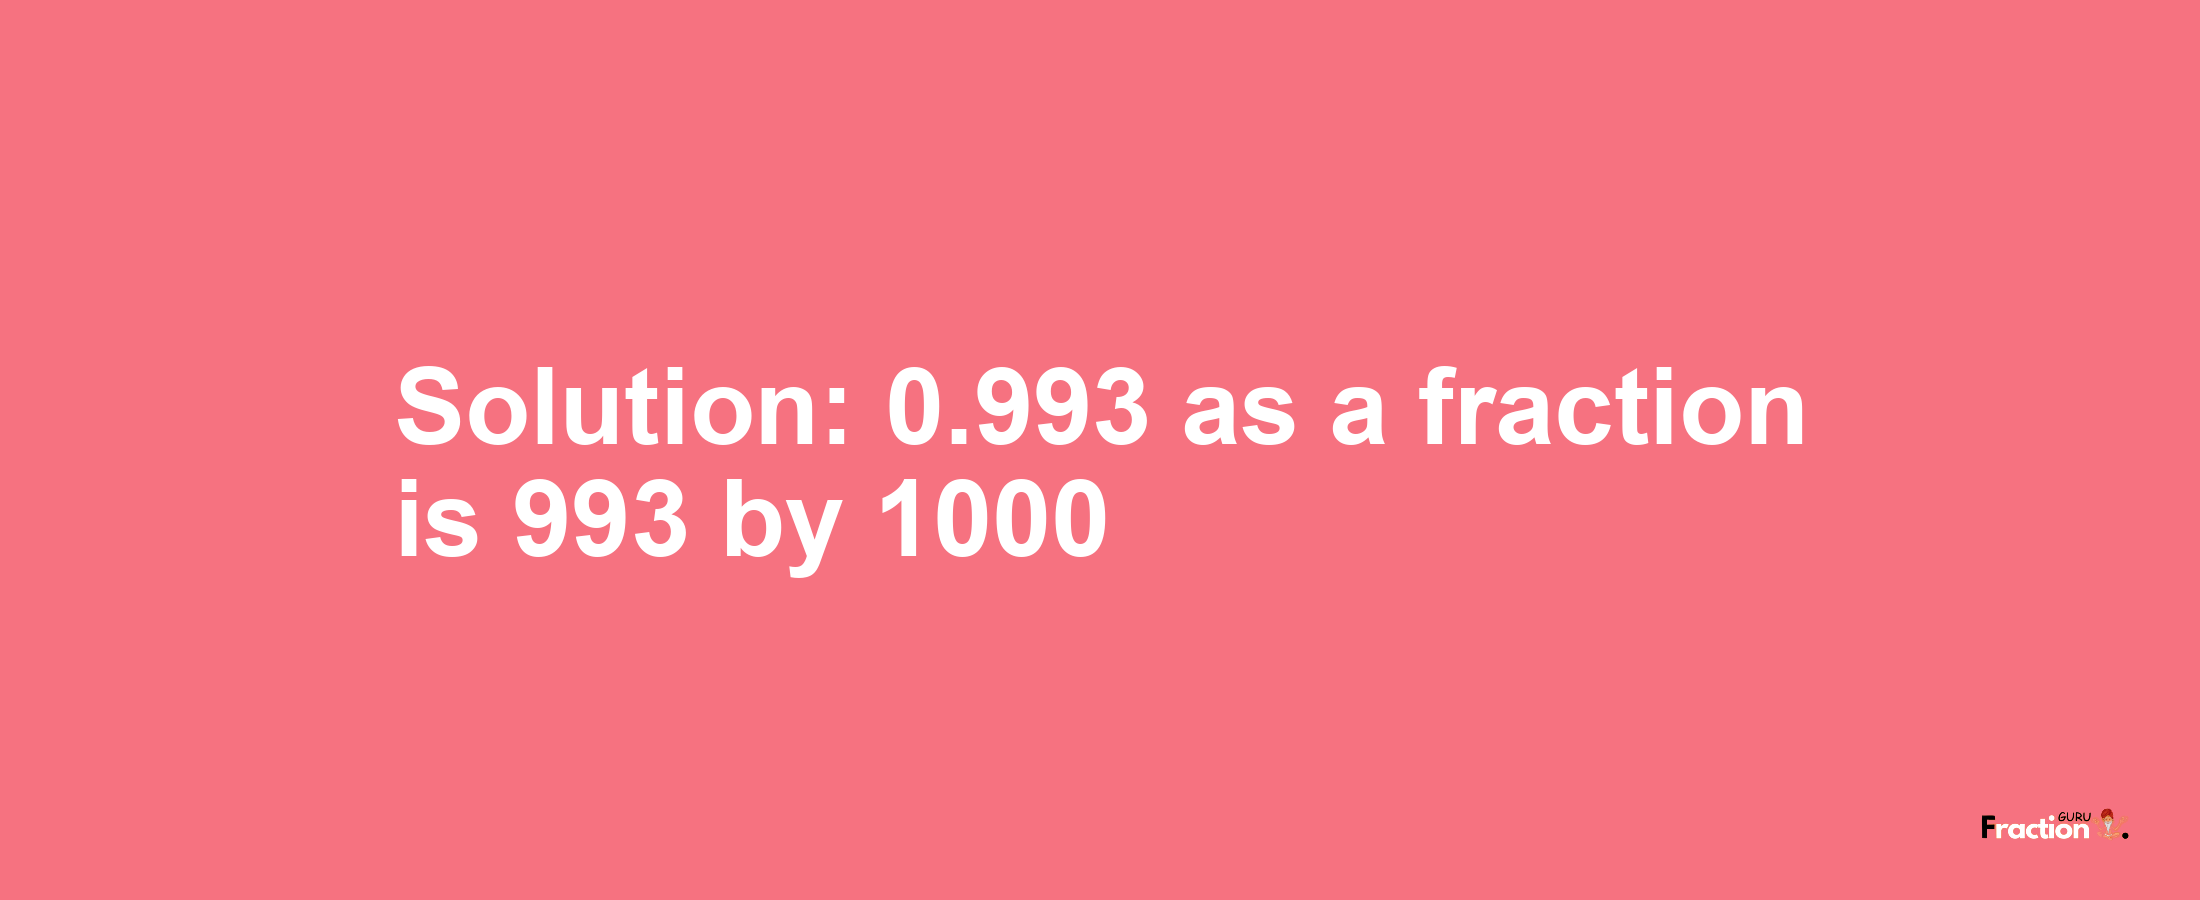 Solution:0.993 as a fraction is 993/1000